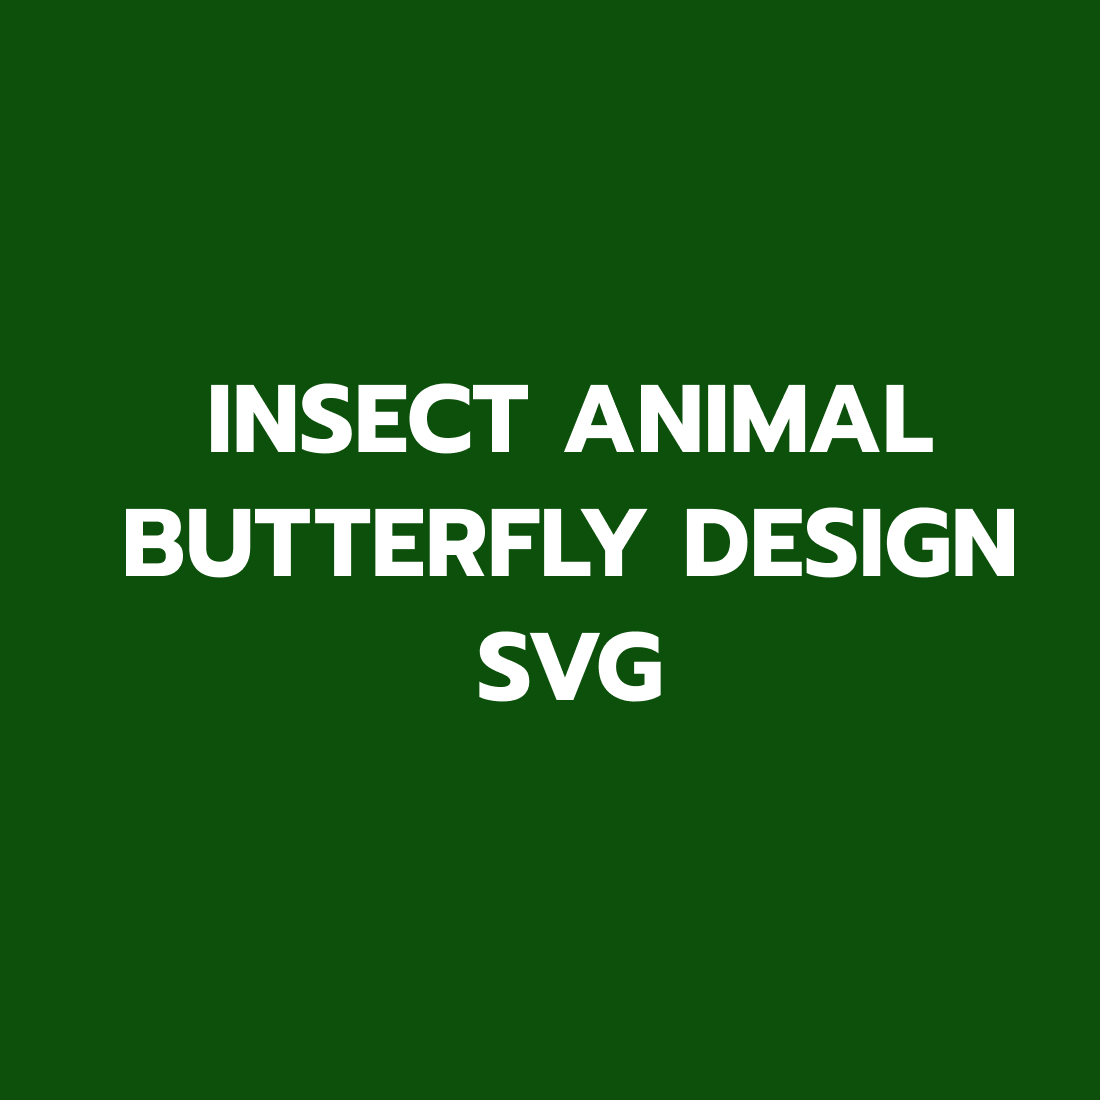 Insect Animal Butterfly Design SVG preview.